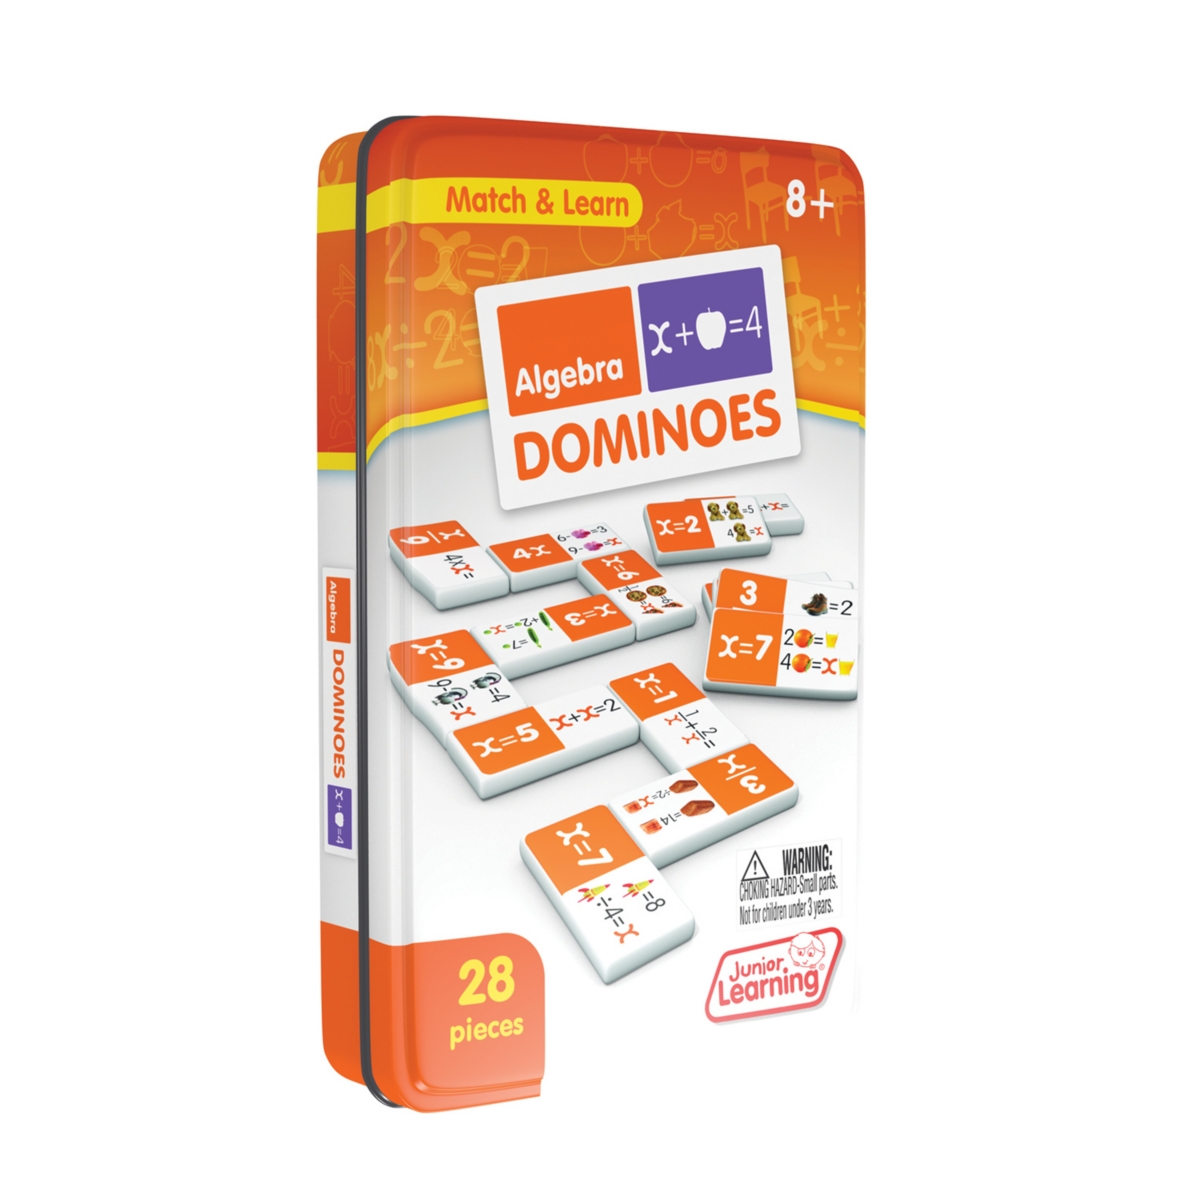 Junior Learning Kids' Algebra Dominoes Match And Learn Educational Learning Game In Multi